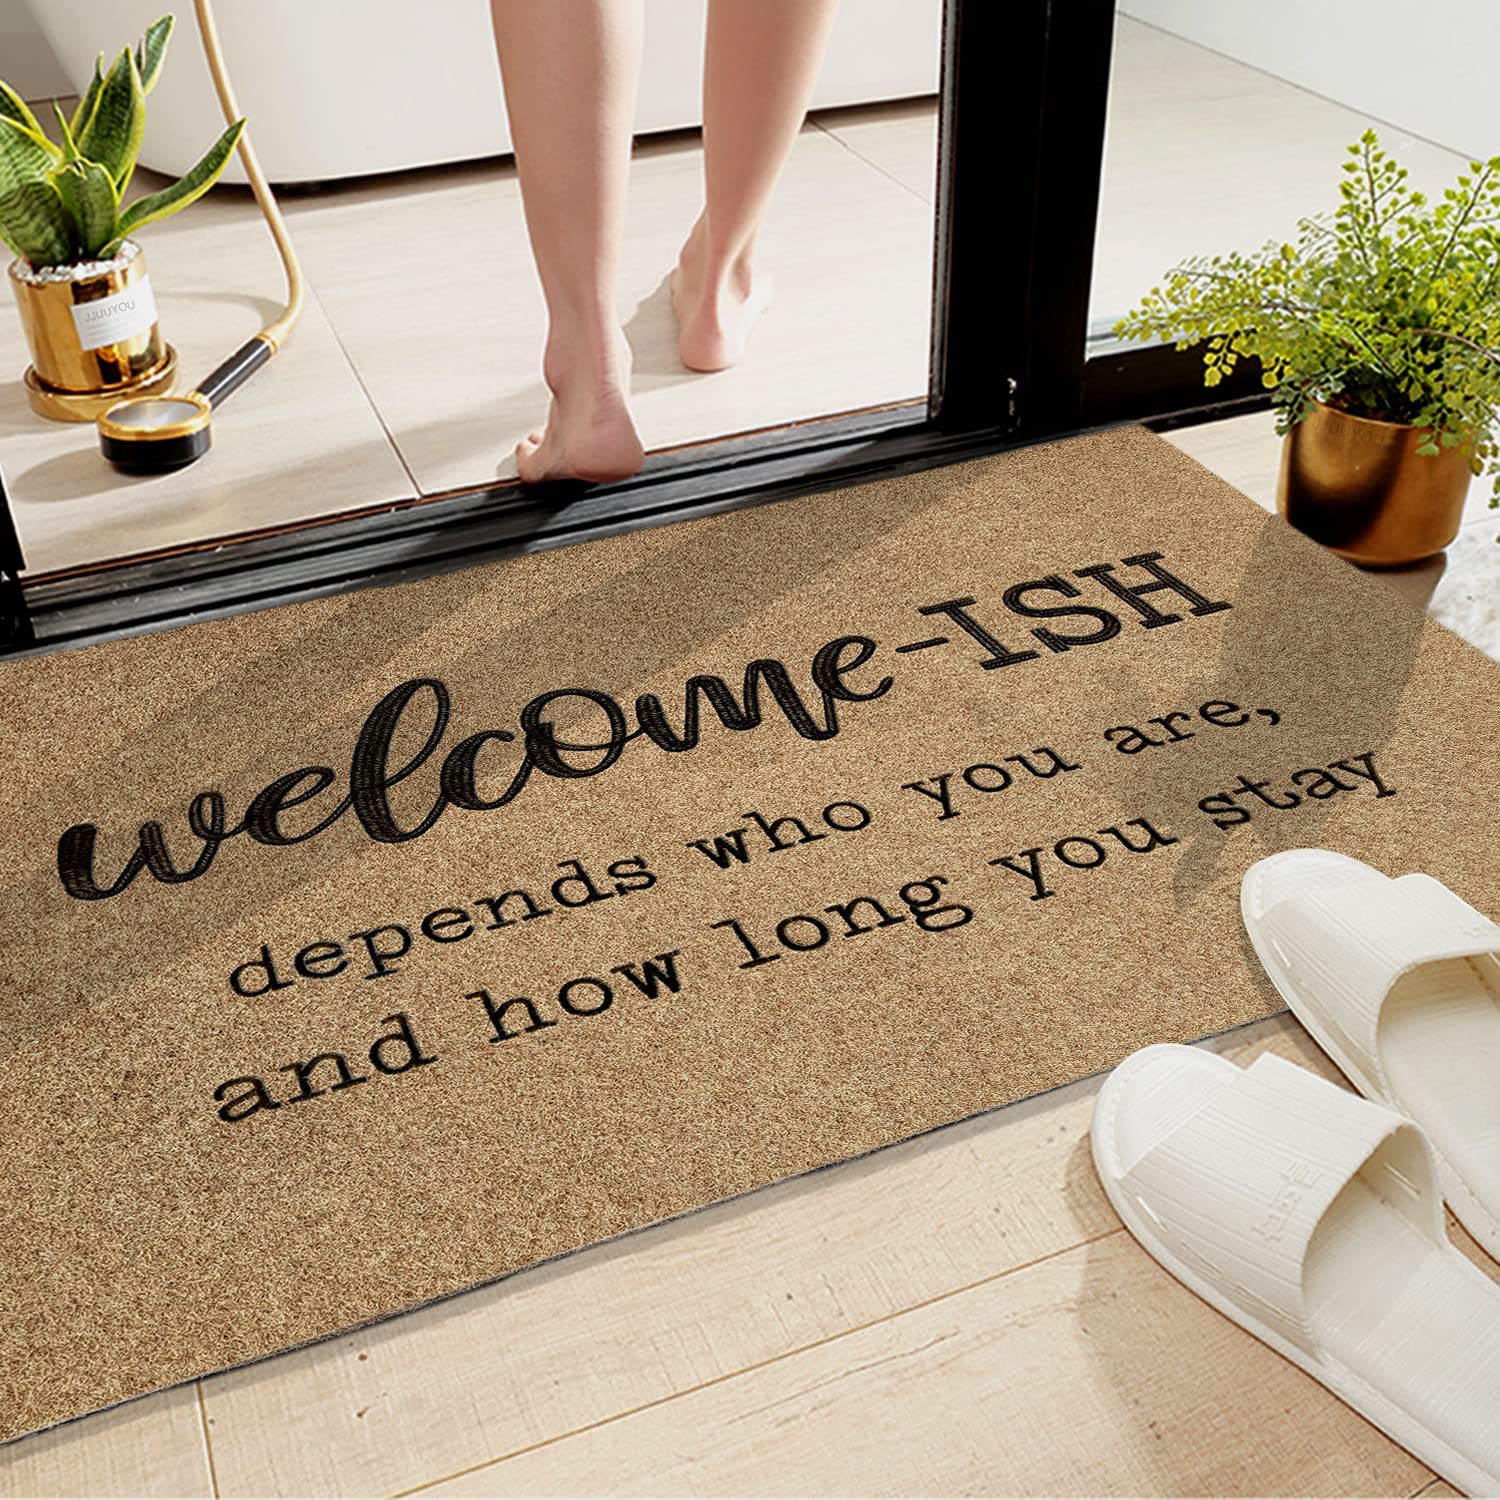 27 Funny Housewarming Gifts That Will Make Them Smile in 2023 - giftlab